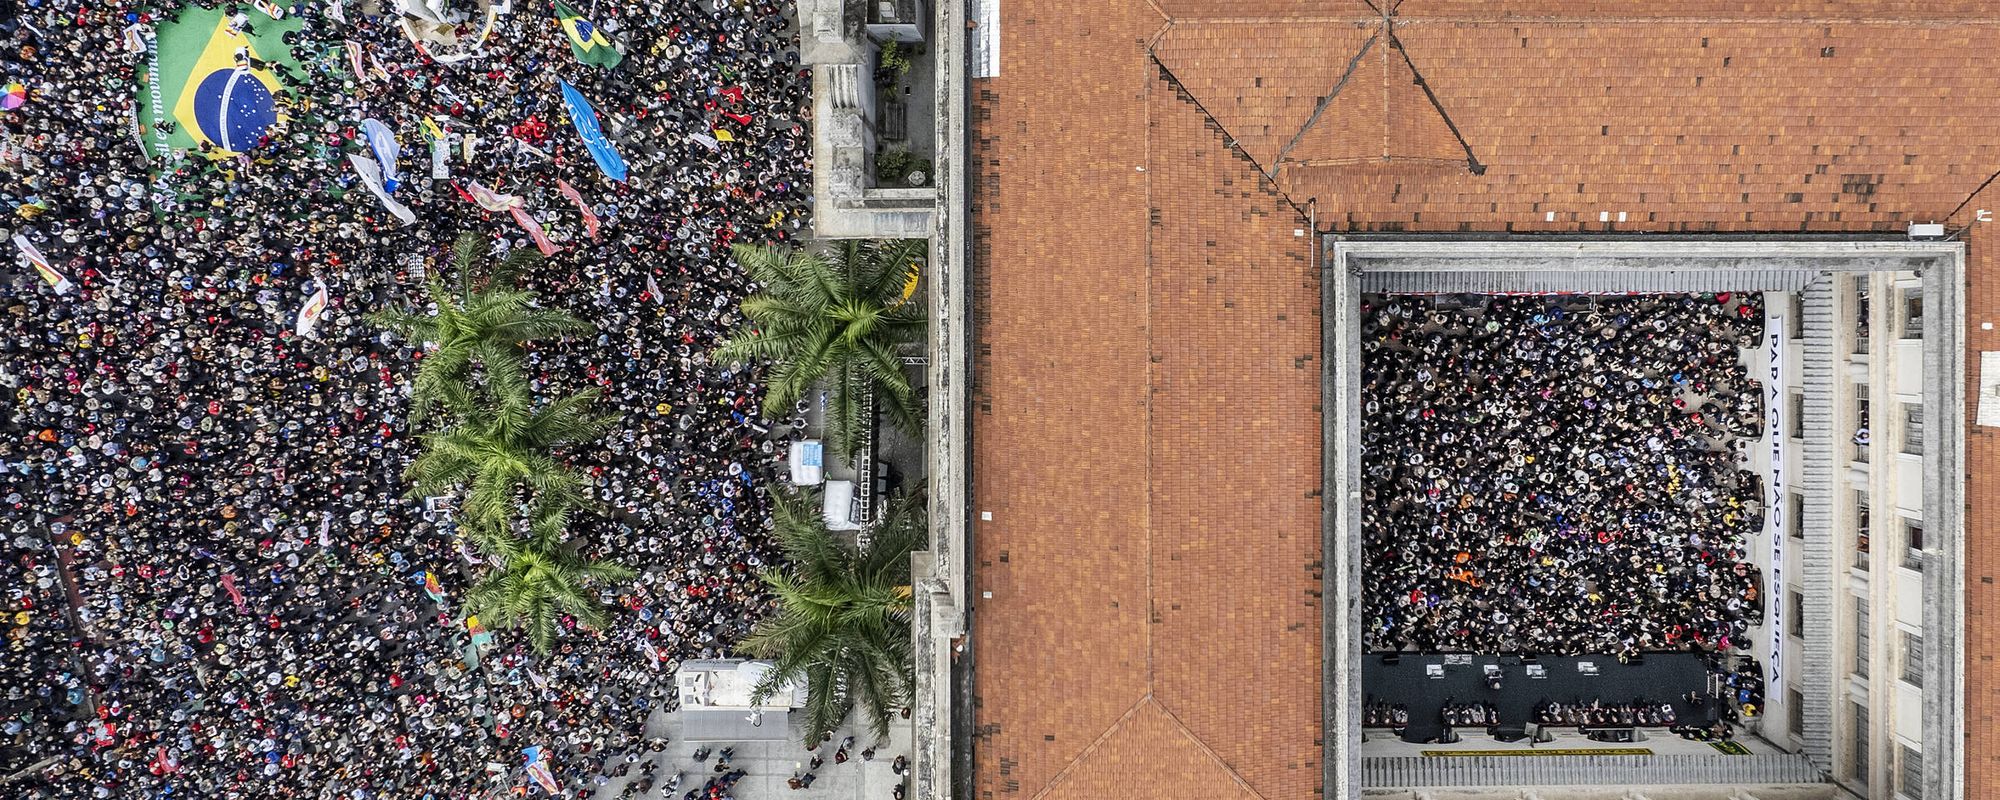 Brazil: Thousands Rally Ahead of Elections